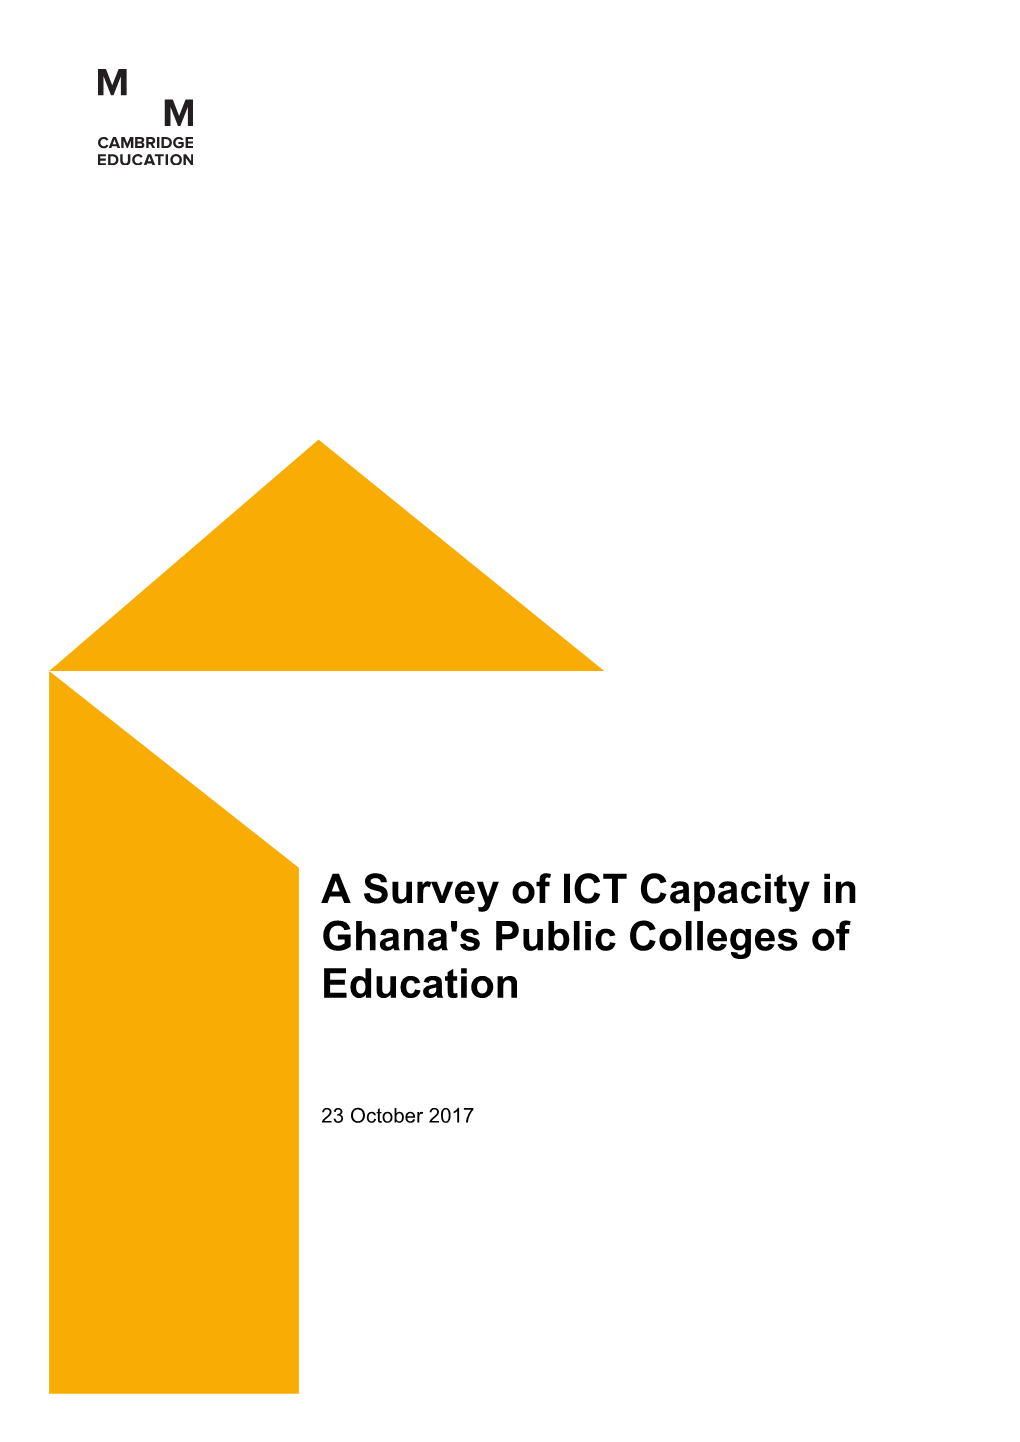 A Survey of ICT Capacity in Ghana's Public Colleges of Education